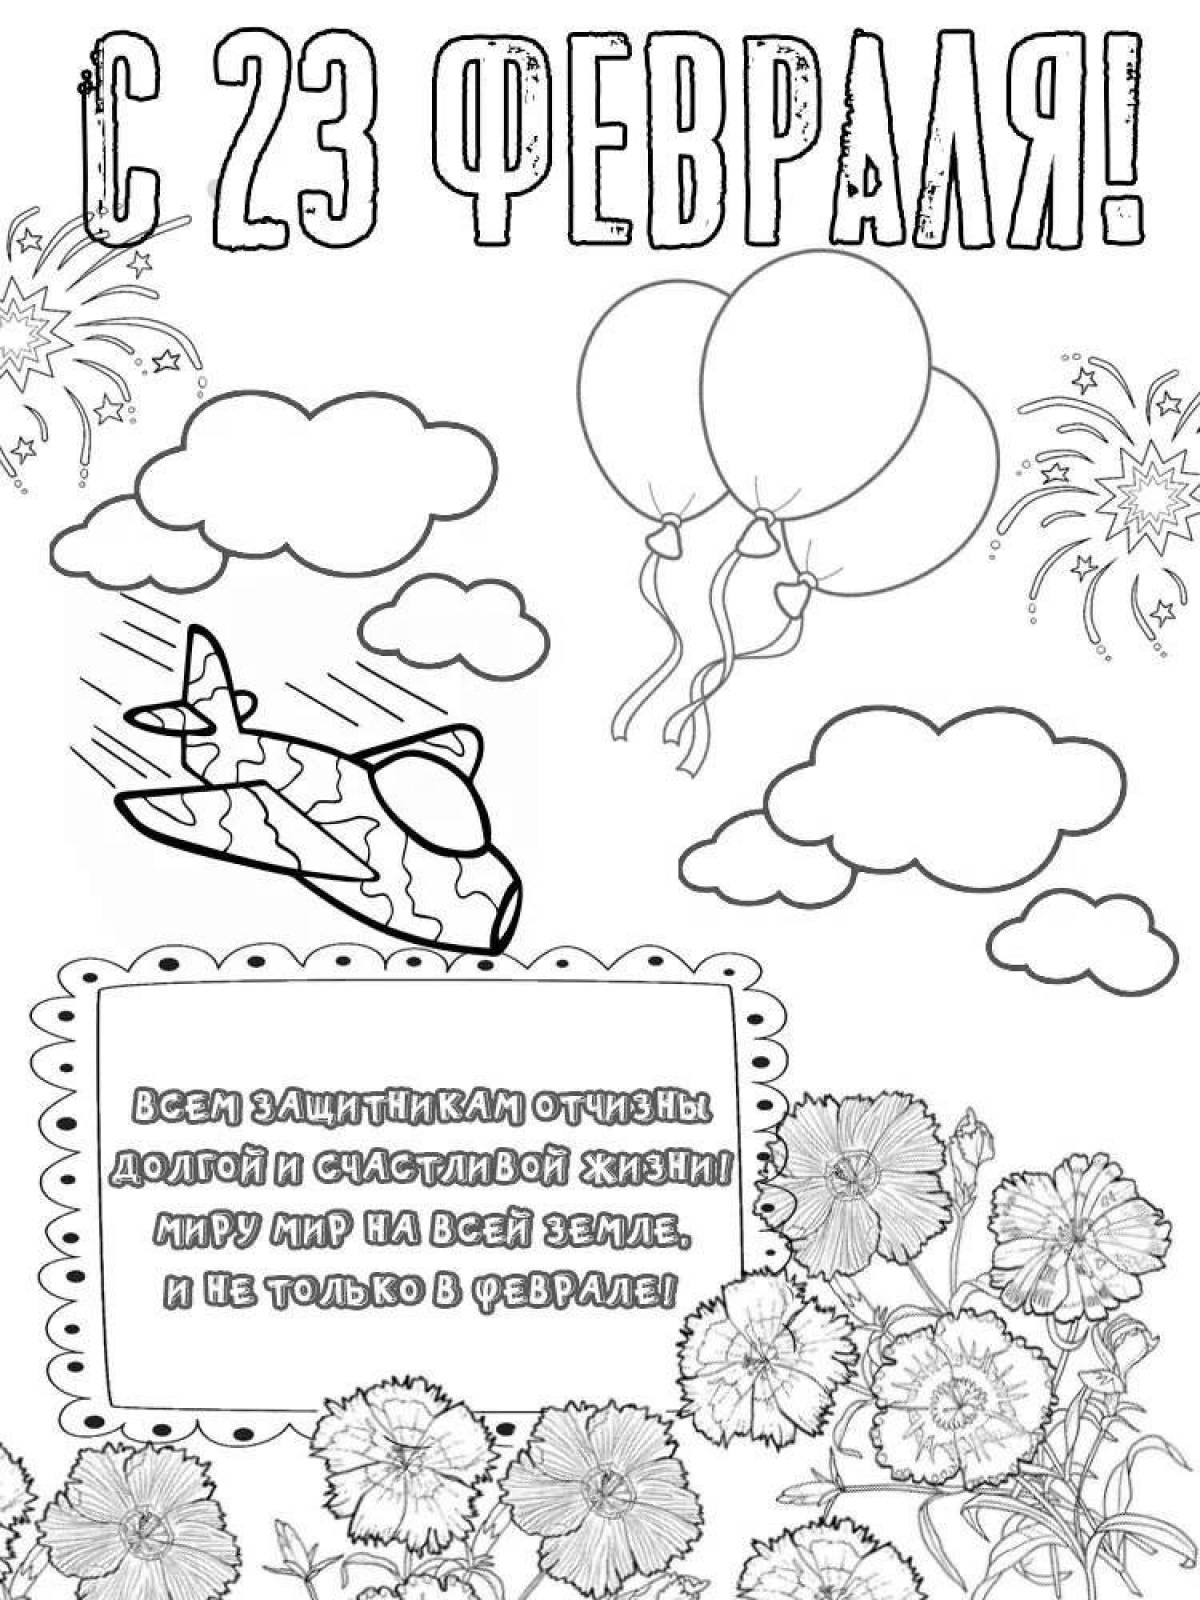 Fun coloring book for February 23rd